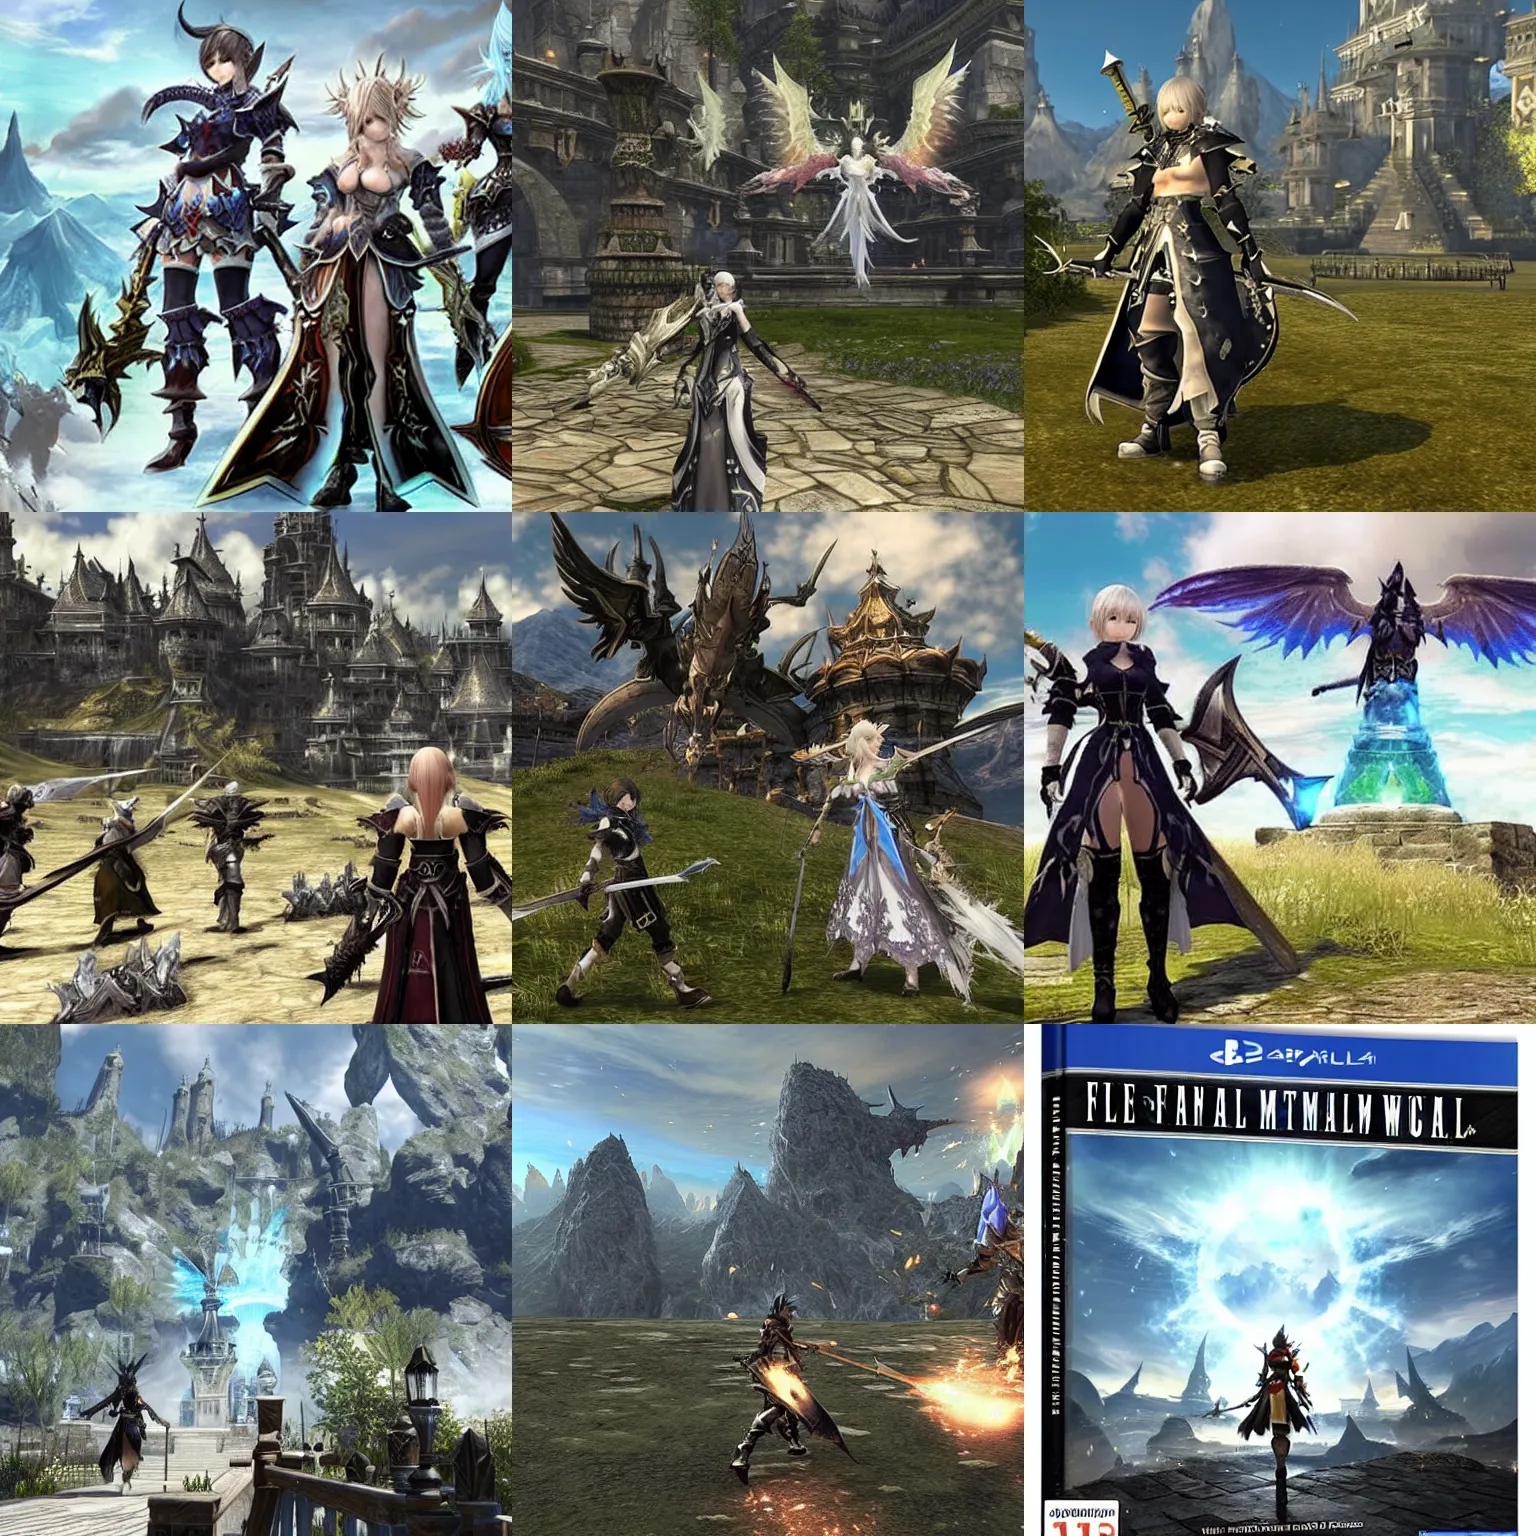 Prompt: Have you heard of the critically acclaimed MMORPG Final Fantasy XIV with an EXPANDED FREE TRIAL? Which you can play through the entirety of A Realm Reborn and the award winning Heavensward Expansion up to level 60 for FREE with no restrictions on playtime.